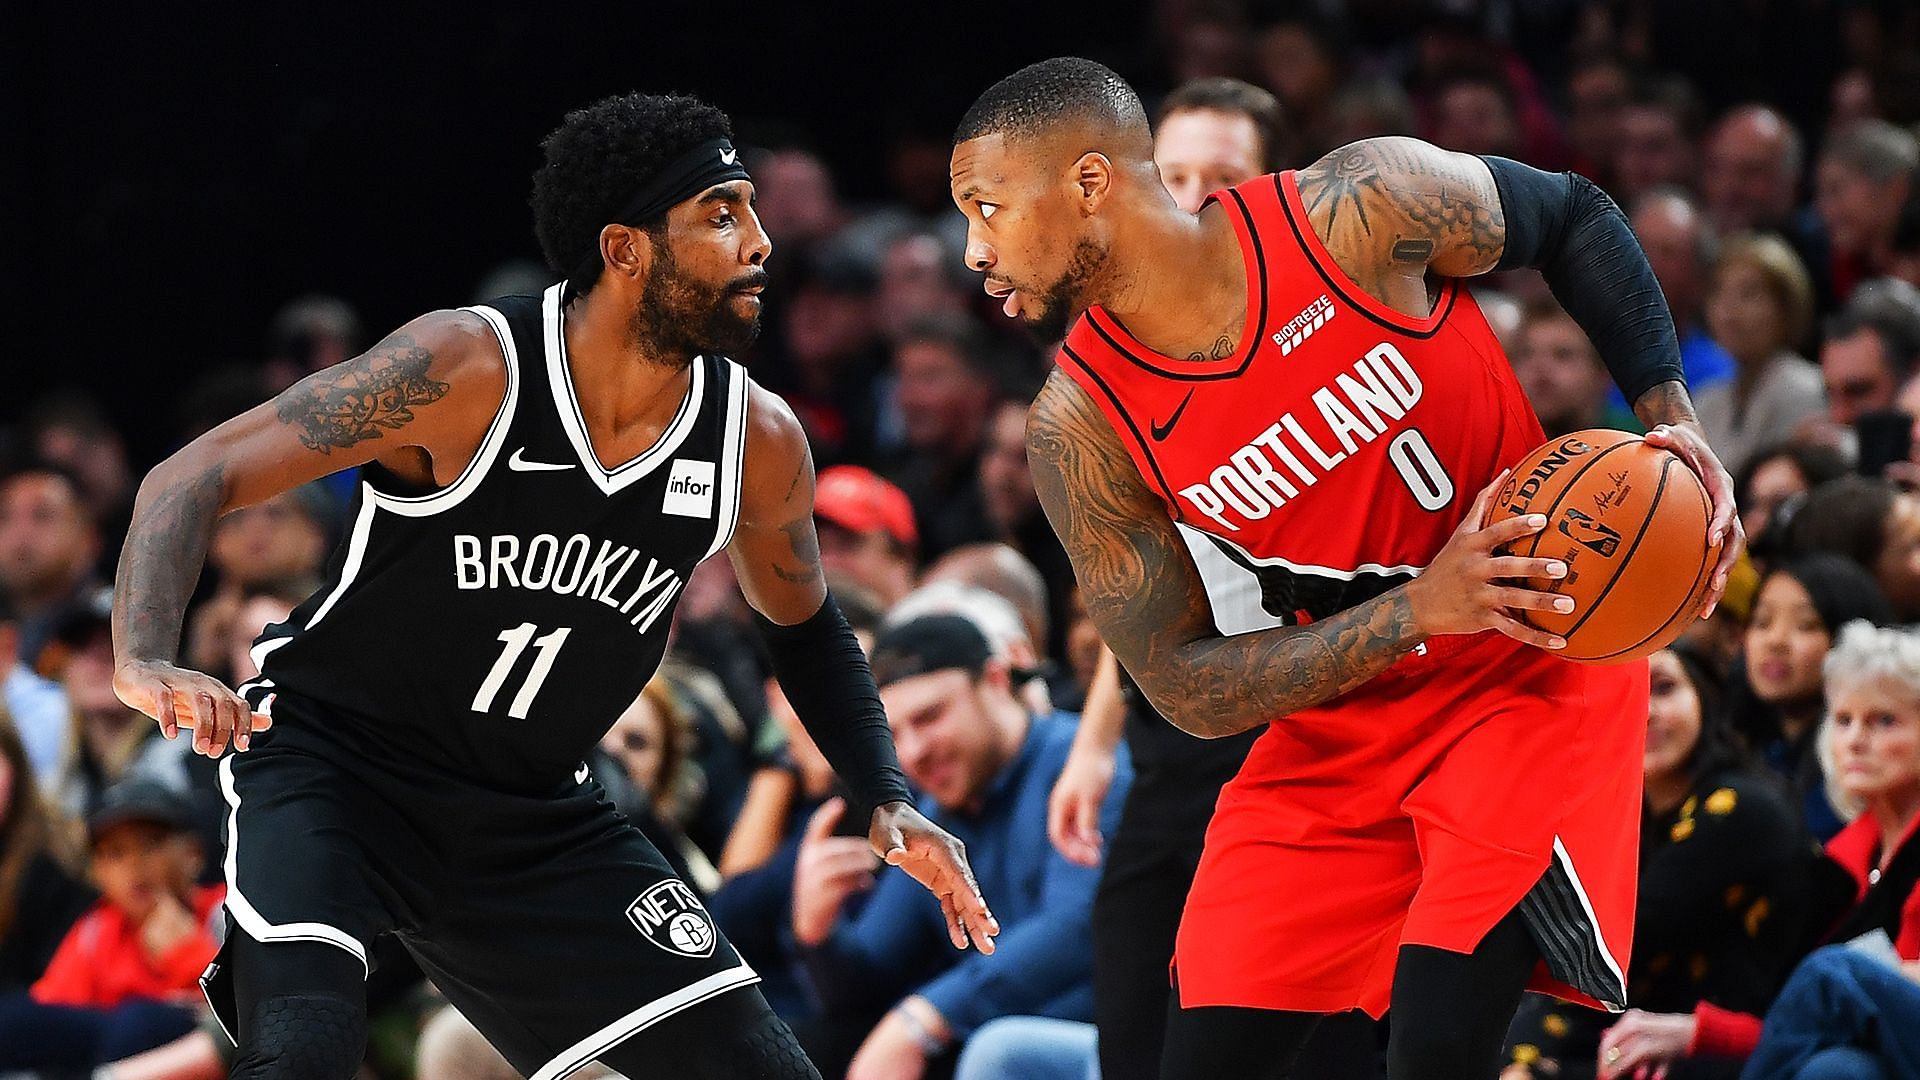 Chris Broussard claims Damian Lillard has been a more influential NBA player than Kyrie Irving